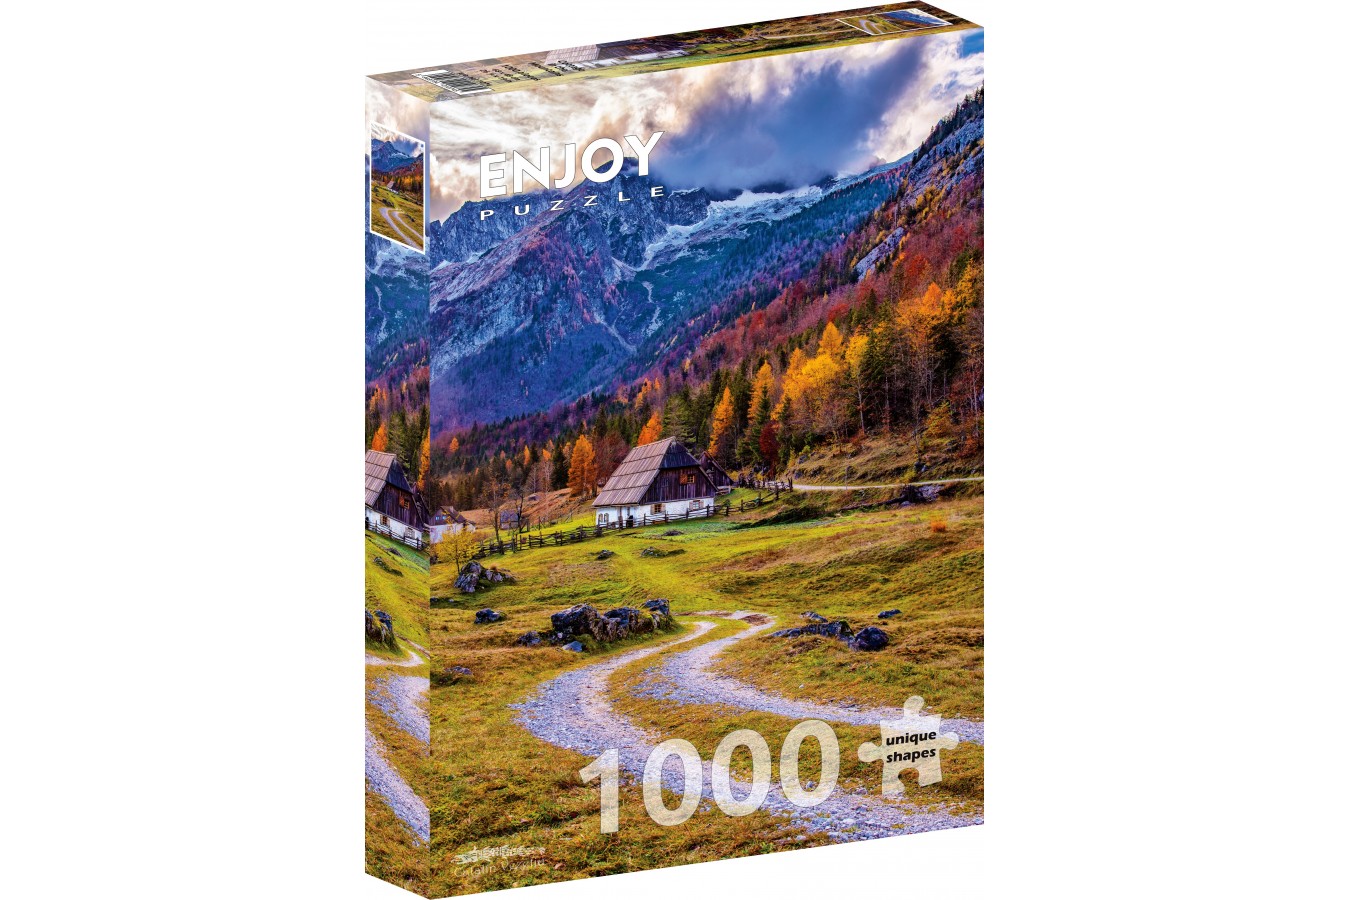 Puzzle 1000 piese - Cottage in the Mountains (Enjoy-1074)